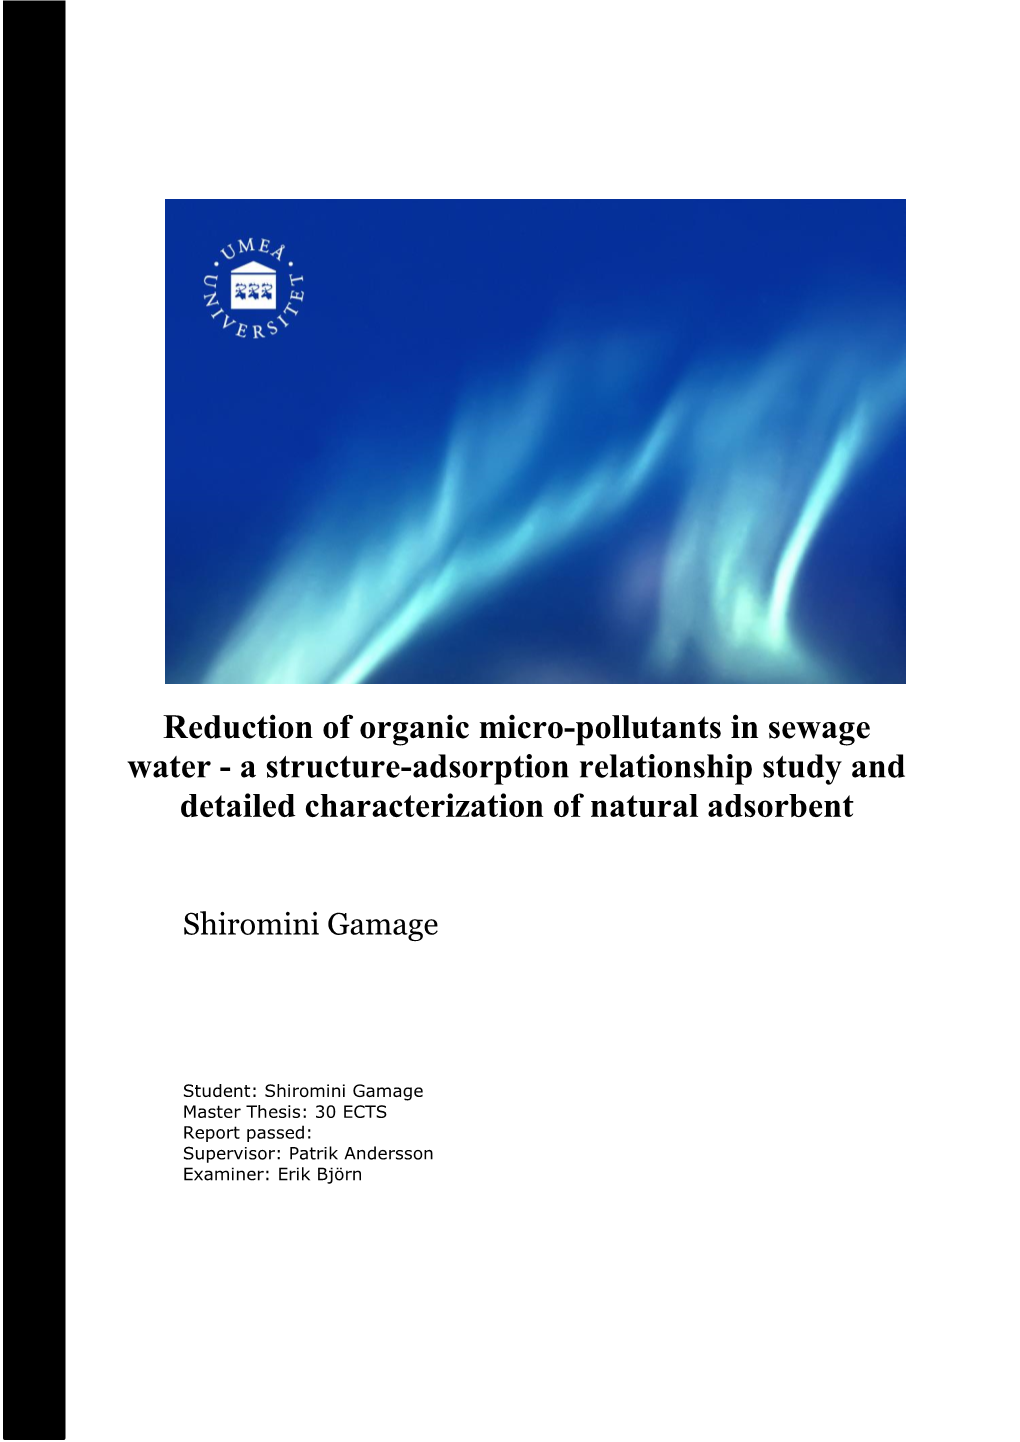 Reduction of Organic Micro-Pollutants in Sewage Water - a Structure-Adsorption Relationship Study and Detailed Characterization of Natural Adsorbent